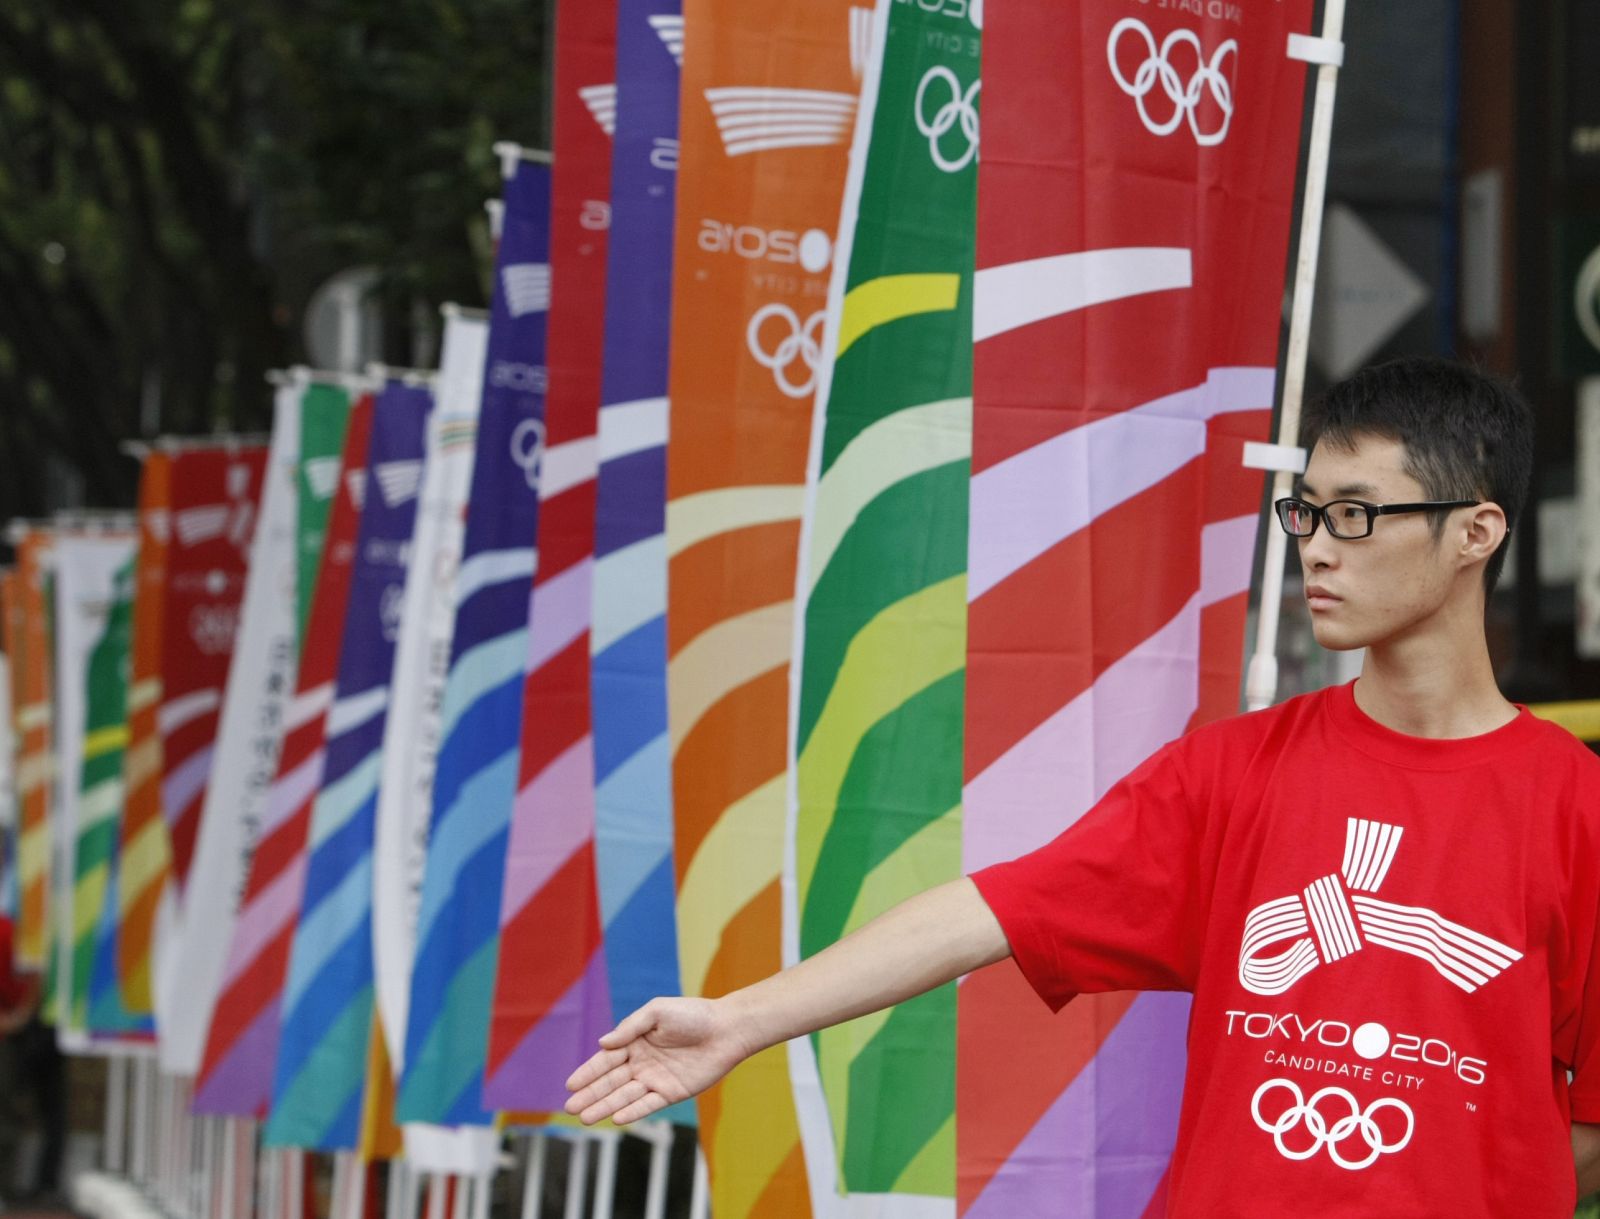 A volunteer stands next to flags during a parade for the Tokyo 2016 Olympic bid, in Tokyo